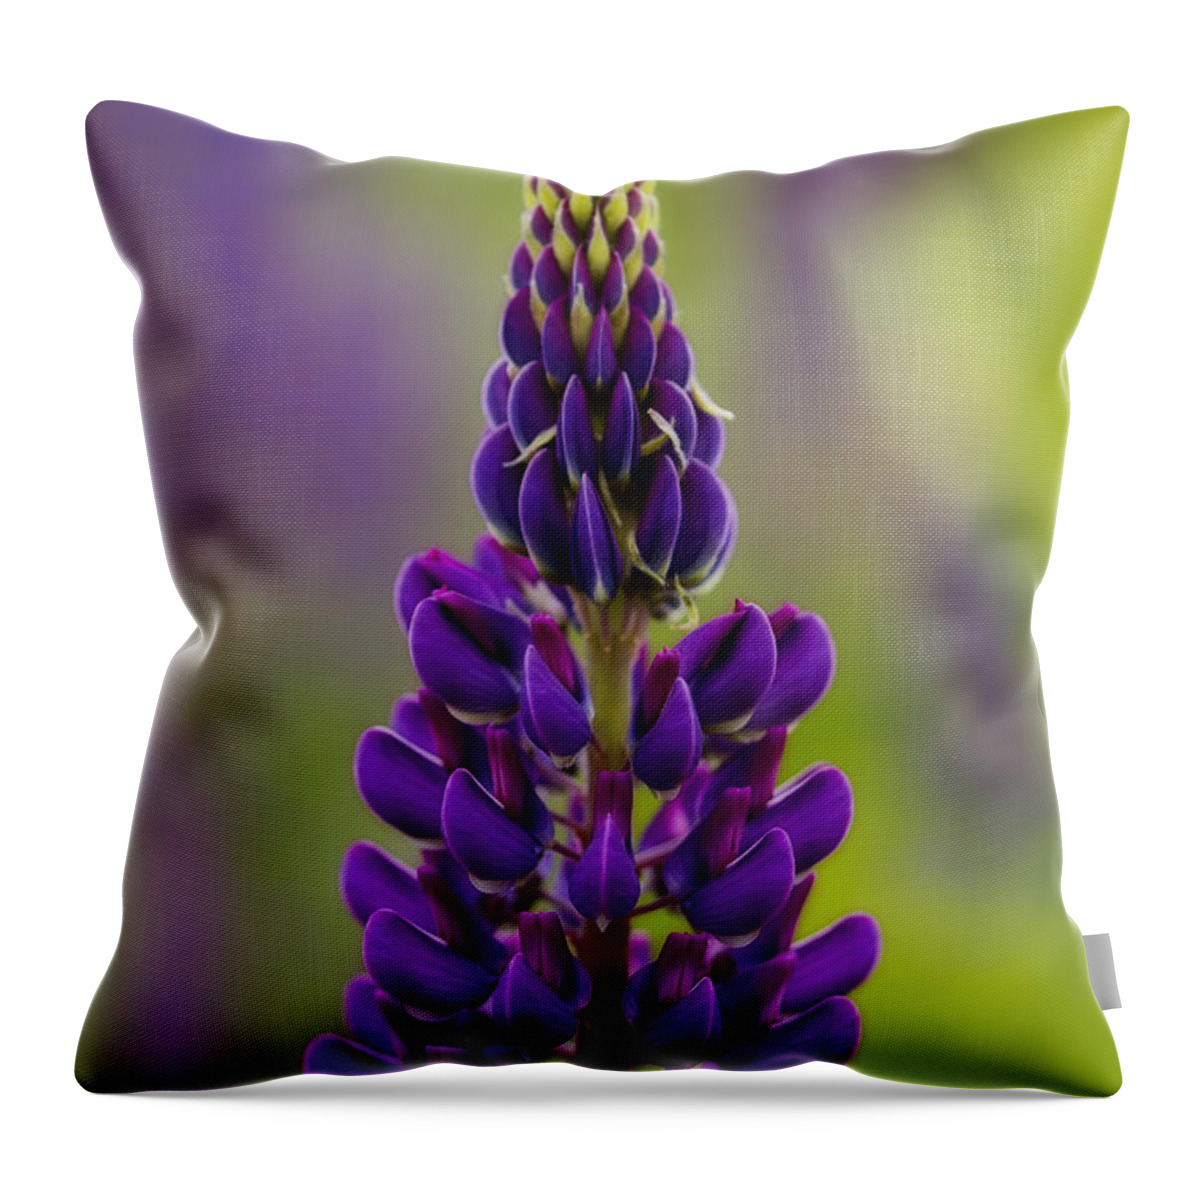 Lupine Throw Pillow featuring the photograph Purple Lupine by John Vose